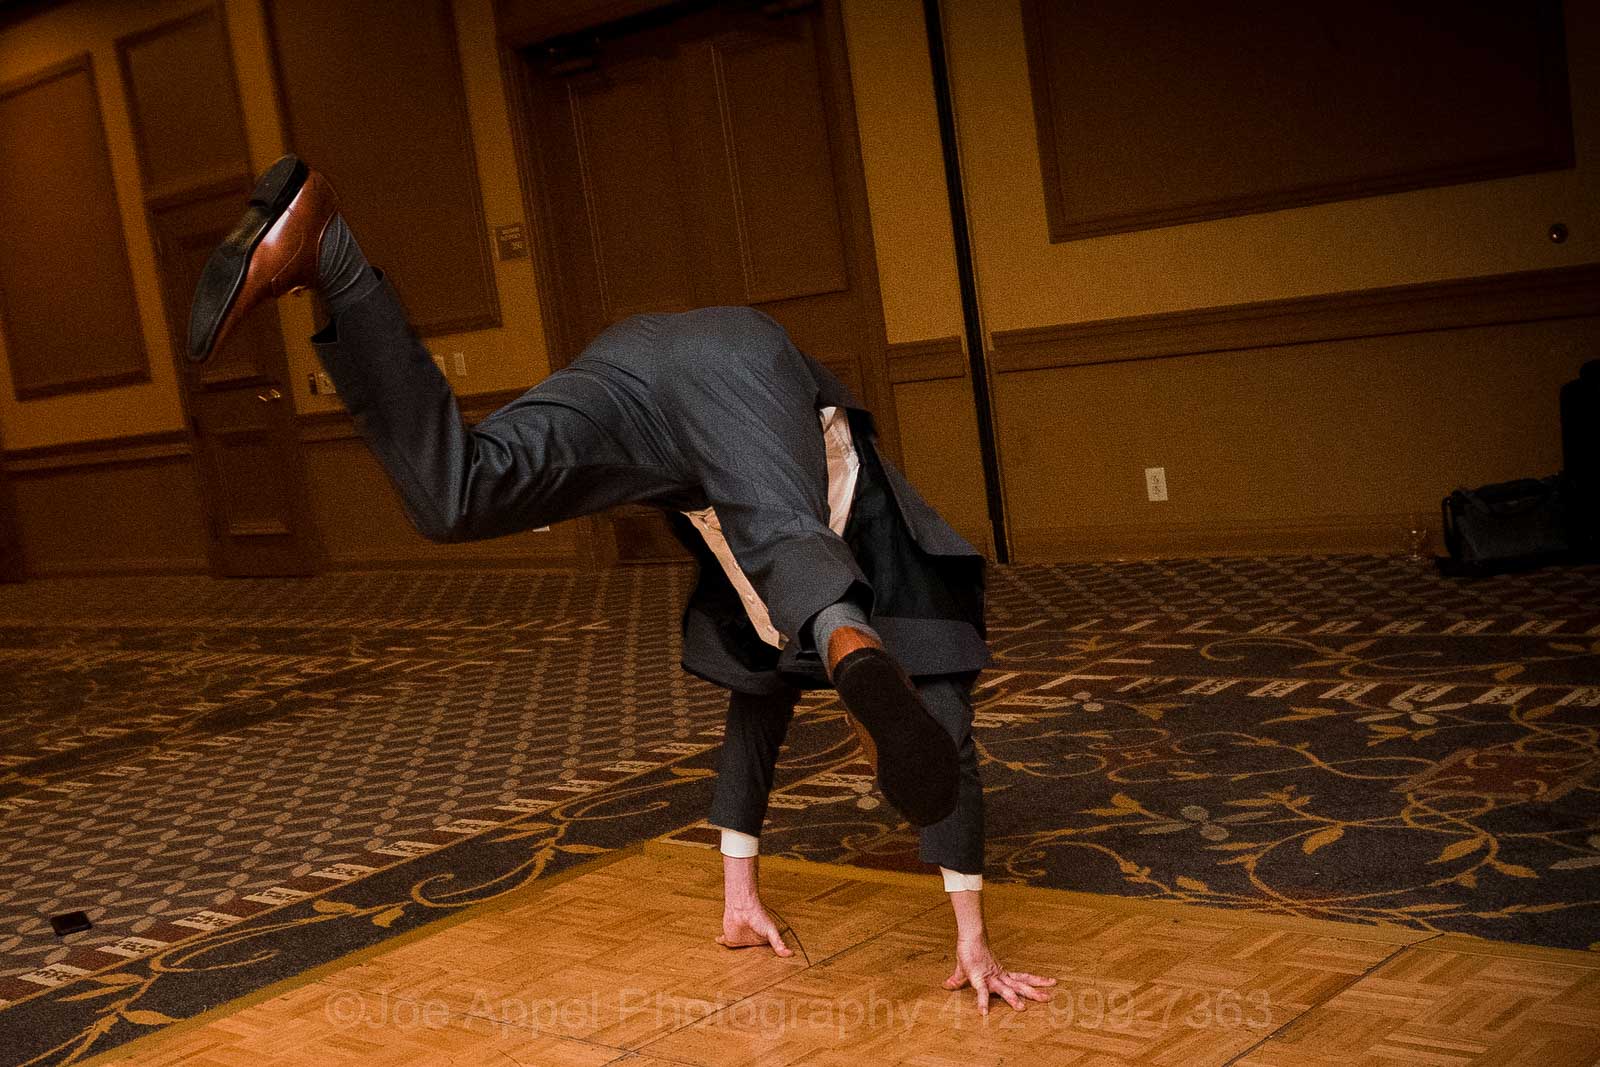 A groom tries a somersault during his wedding.